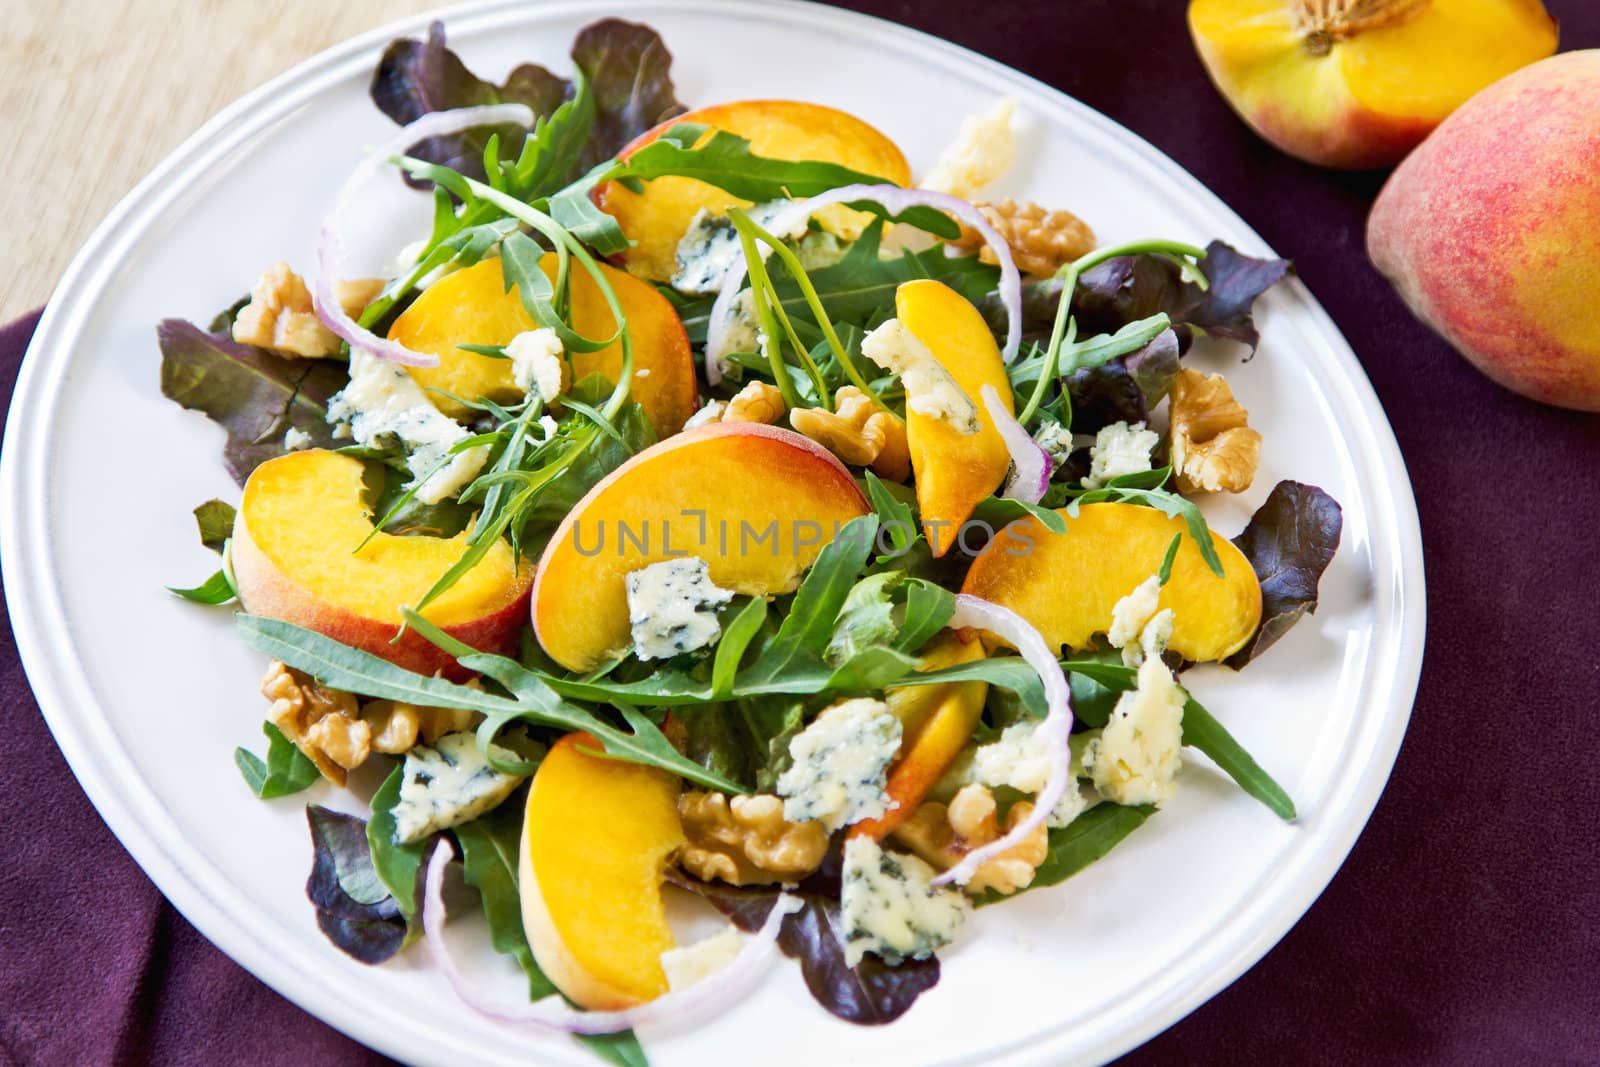 Peach with Blue cheese ,Walnut and Rocket salad